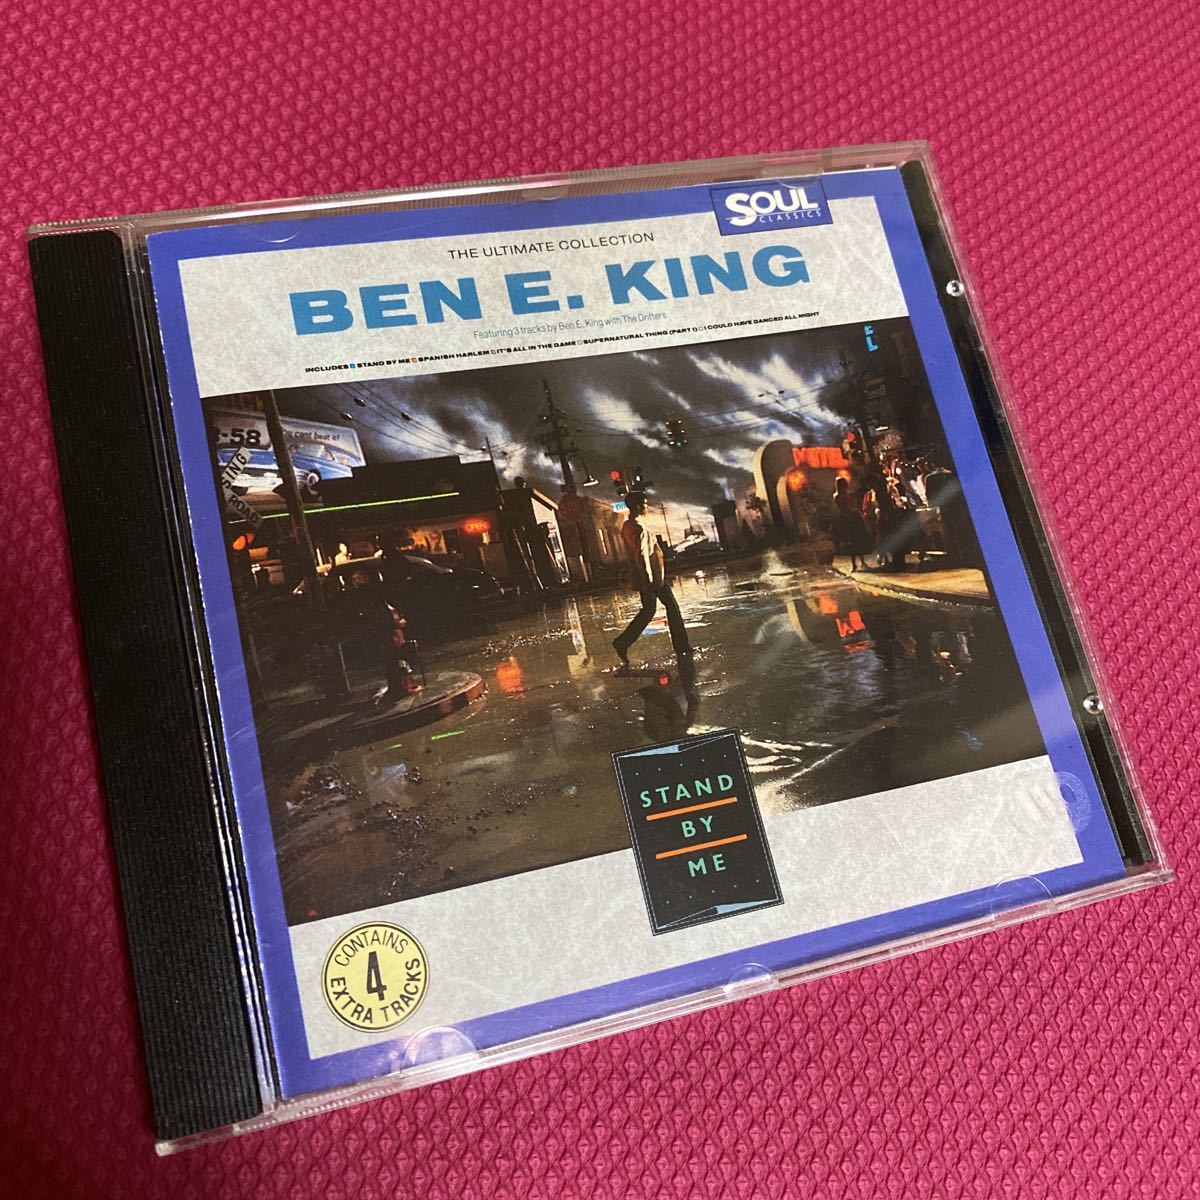 BEN E.KING 芸能人愛用 ベンE.キング THE 人気ショップが最安値挑戦 ULTIMATE COLLECTION ME STAND 7567-80213-2 輸入盤CD BY